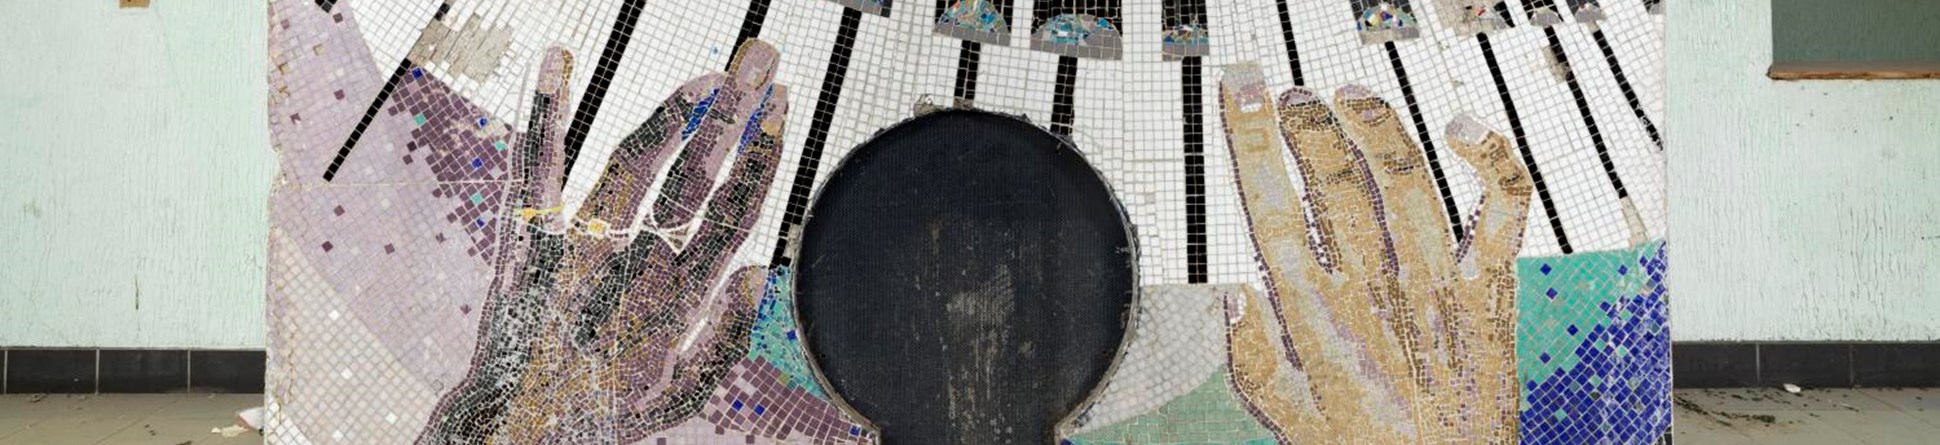 A mosaic depicting a black hand and a white hand on a piano keyboard